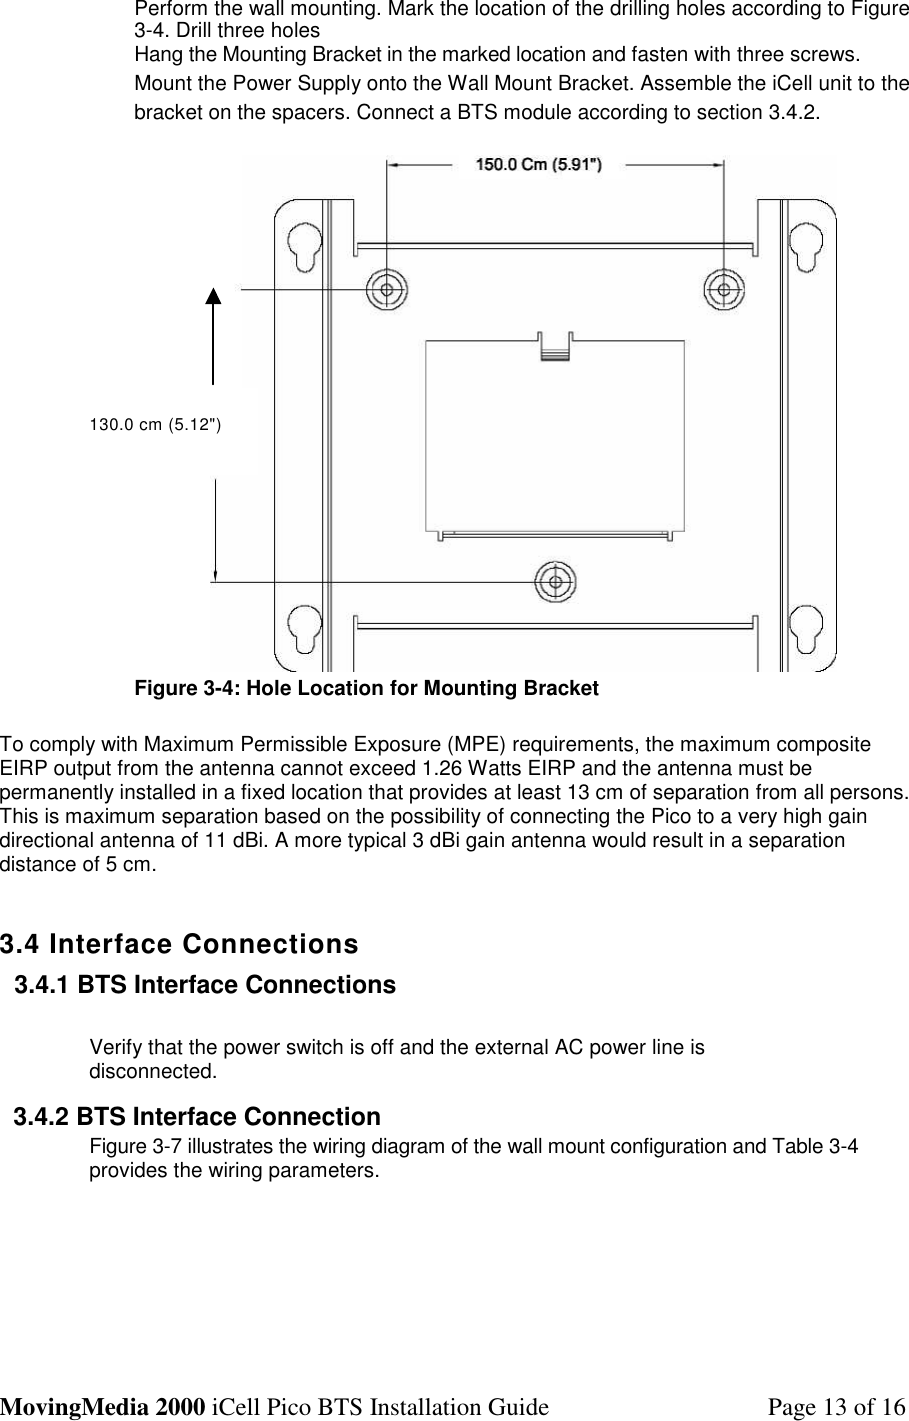 MovingMedia 2000 iCell Pico BTS Installation Guide Page 13 of 16Perform the wall mounting. Mark the location of the drilling holes according to Figure3-4. Drill three holesHang the Mounting Bracket in the marked location and fasten with three screws.Mount the Power Supply onto the Wall Mount Bracket. Assemble the iCell unit to thebracket on the spacers. Connect a BTS module according to section 3.4.2.Figure 3-4: Hole Location for Mounting BracketTo comply with Maximum Permissible Exposure (MPE) requirements, the maximum compositeEIRP output from the antenna cannot exceed 1.26 Watts EIRP and the antenna must bepermanently installed in a fixed location that provides at least 13 cm of separation from all persons.This is maximum separation based on the possibility of connecting the Pico to a very high gaindirectional antenna of 11 dBi. A more typical 3 dBi gain antenna would result in a separationdistance of 5 cm.3.4 Interface Connections3.4.1 BTS Interface ConnectionsVerify that the power switch is off and the external AC power line isdisconnected.3.4.2 BTS Interface ConnectionFigure 3-7 illustrates the wiring diagram of the wall mount configuration and Table 3-4provides the wiring parameters.130.0 cm (5.12&quot;)